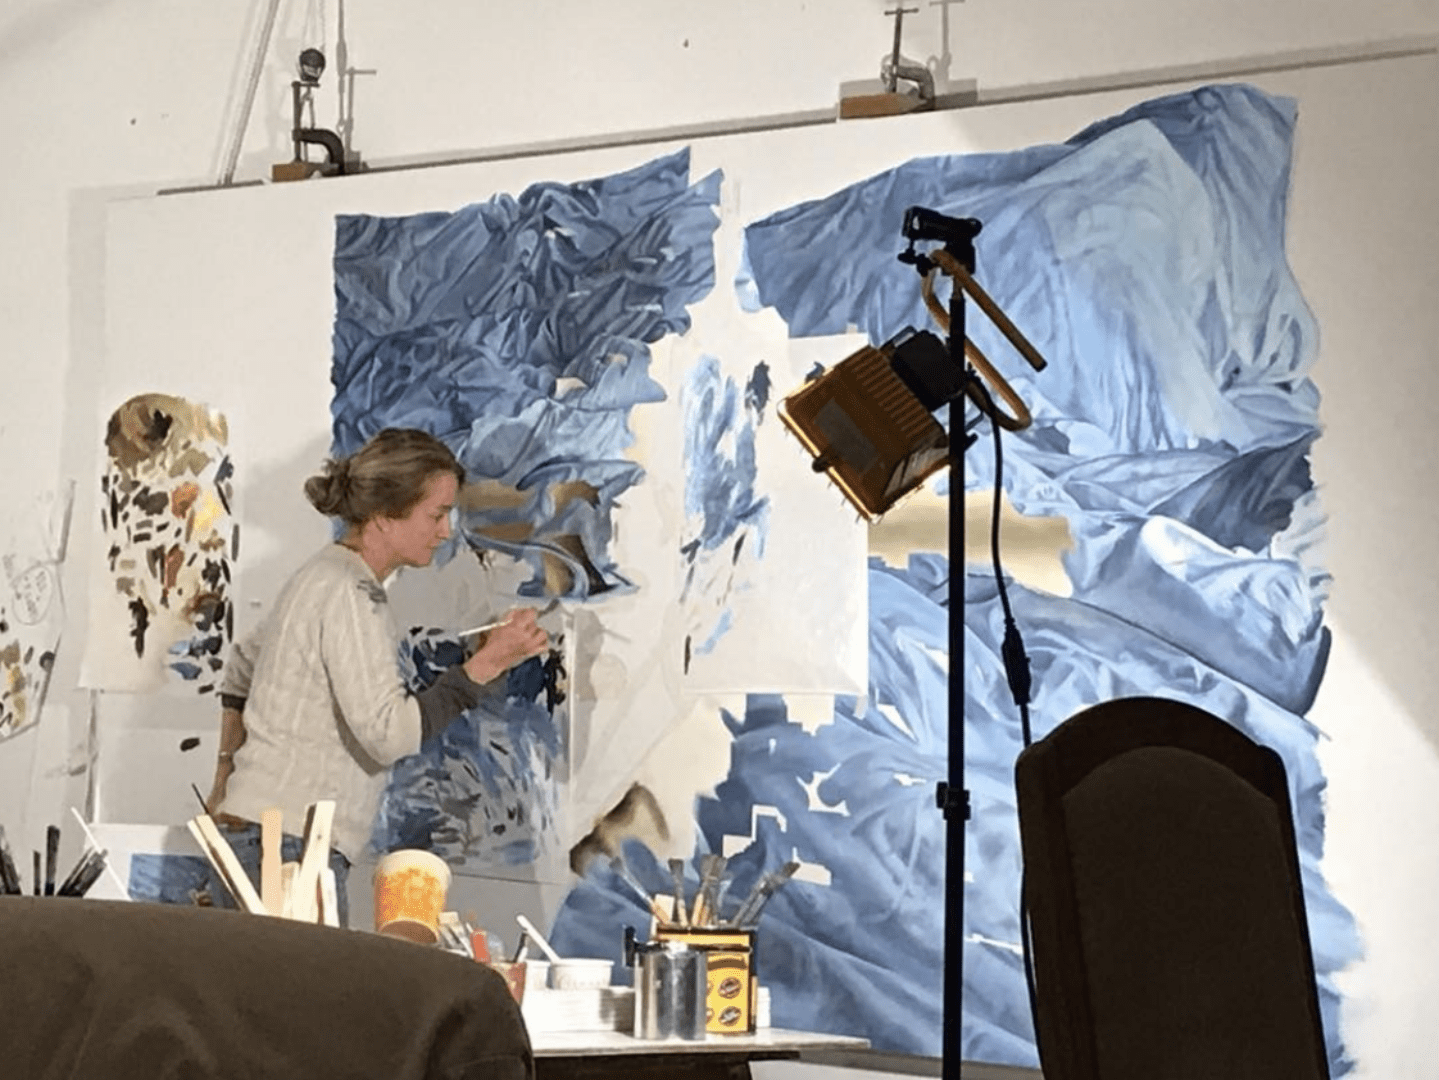 Artist Christine Keefe painting in her studio